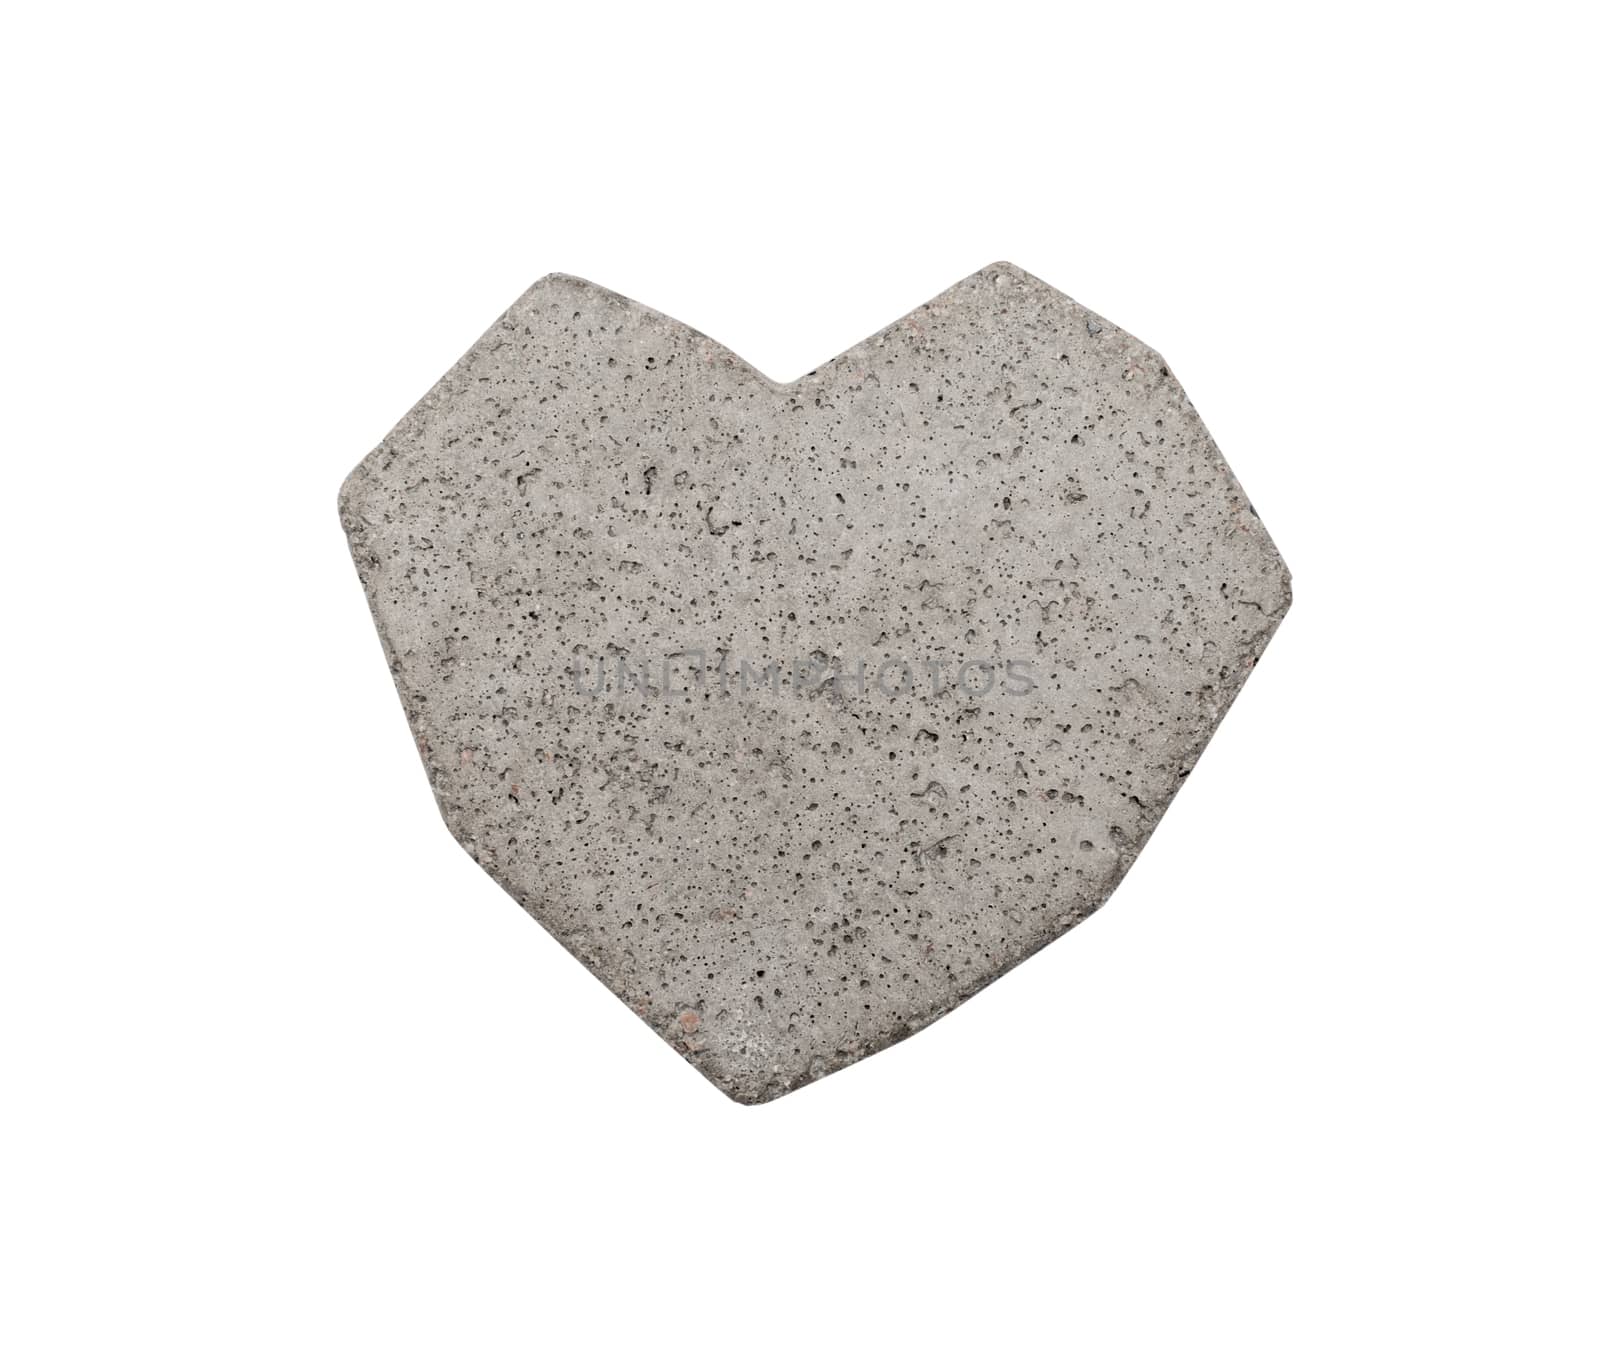 Heart of concrete on a white background